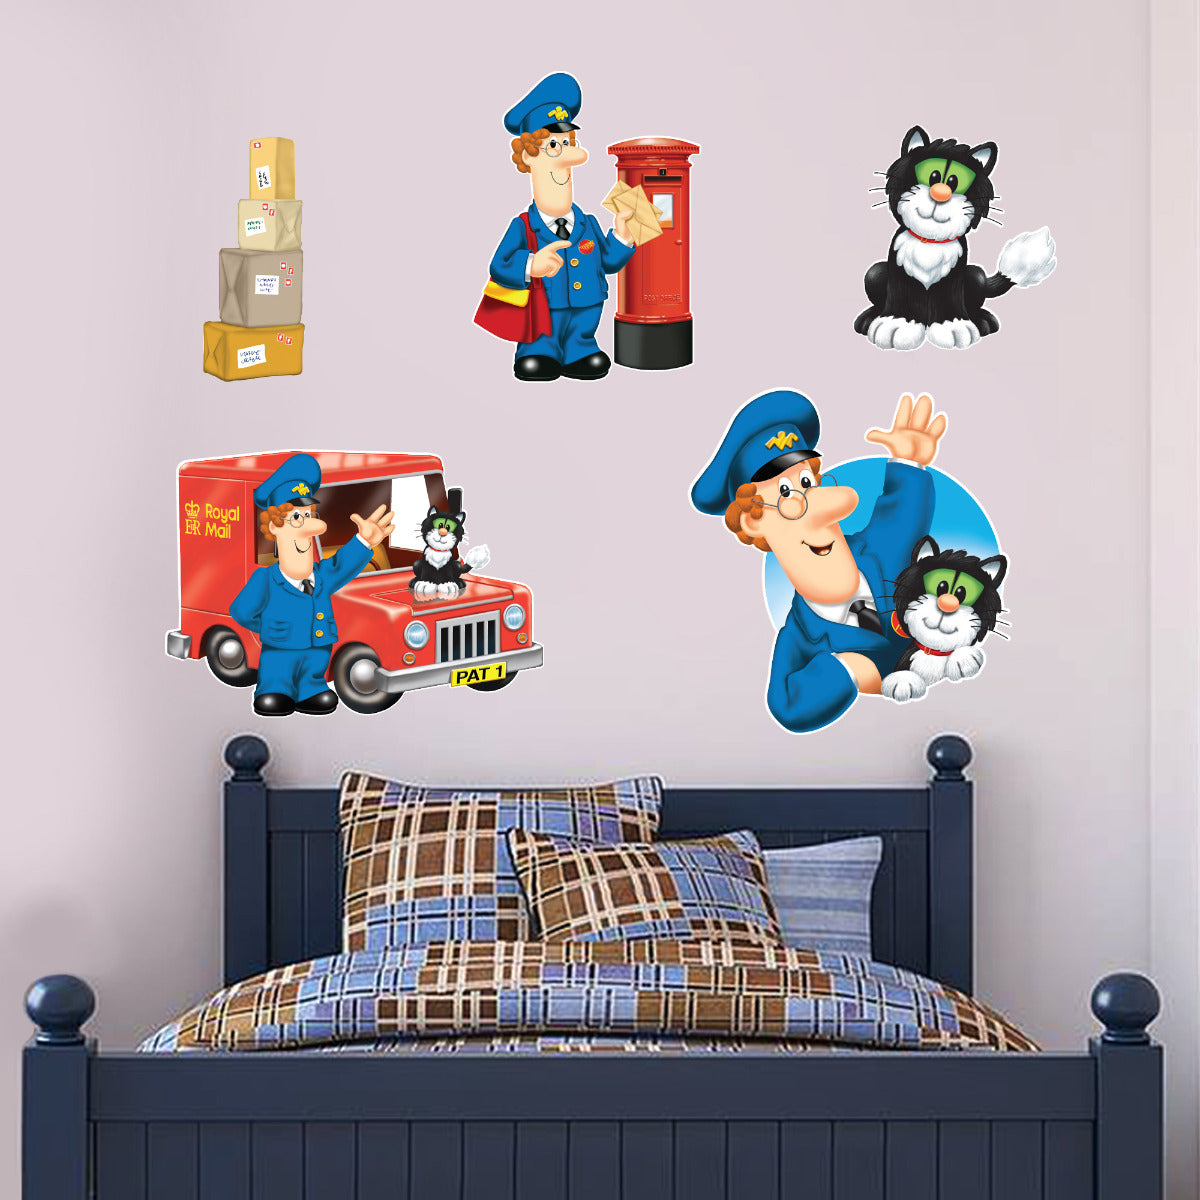 Postman Pat Special Delivery Service Wall Sticker